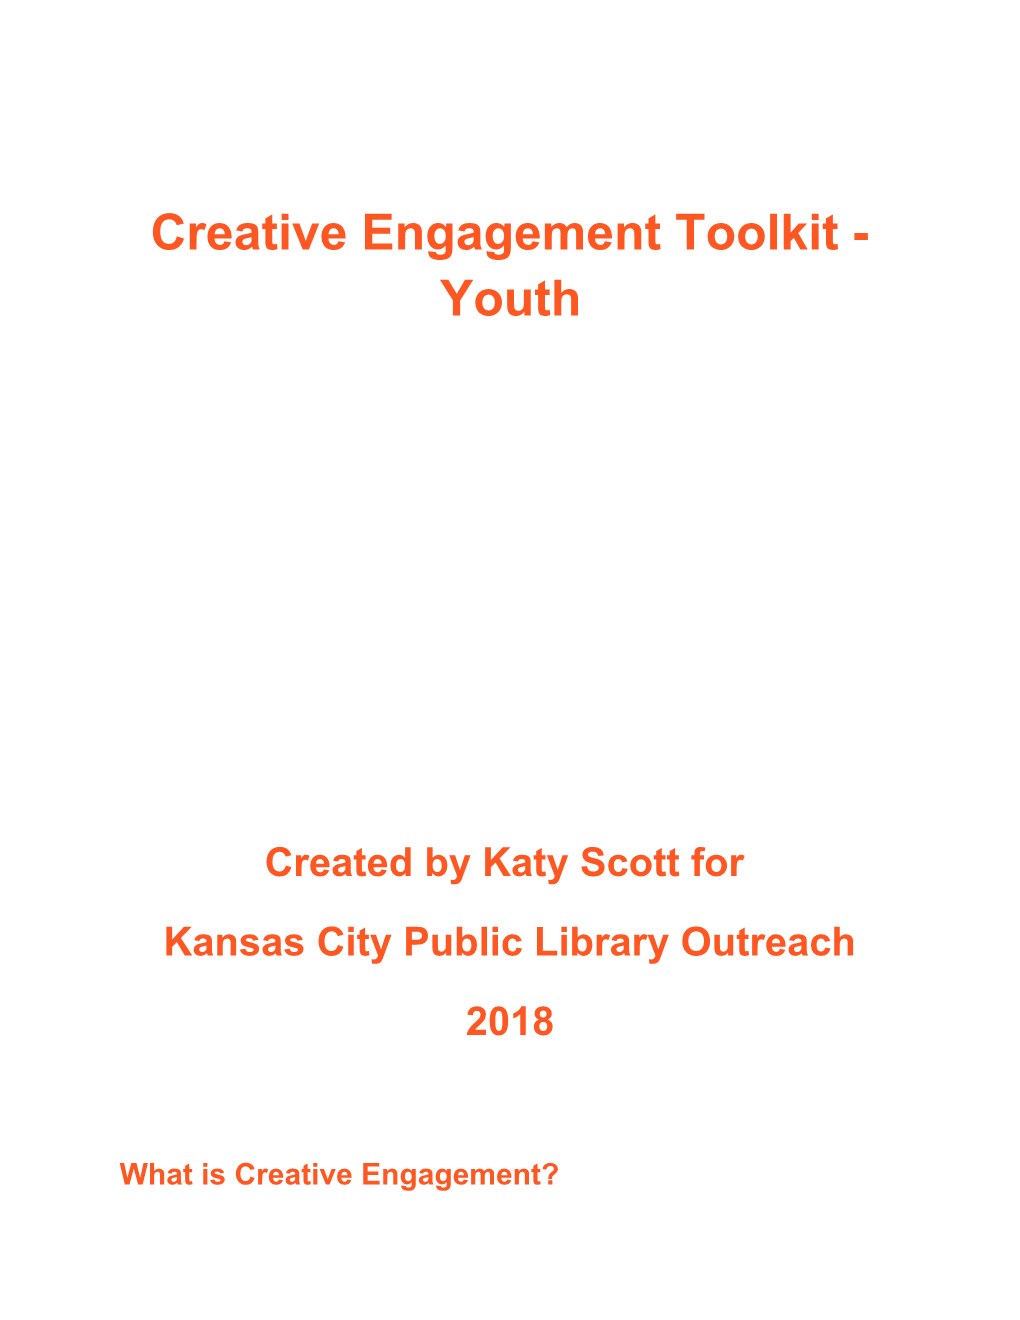 Creative Engagement - Youth